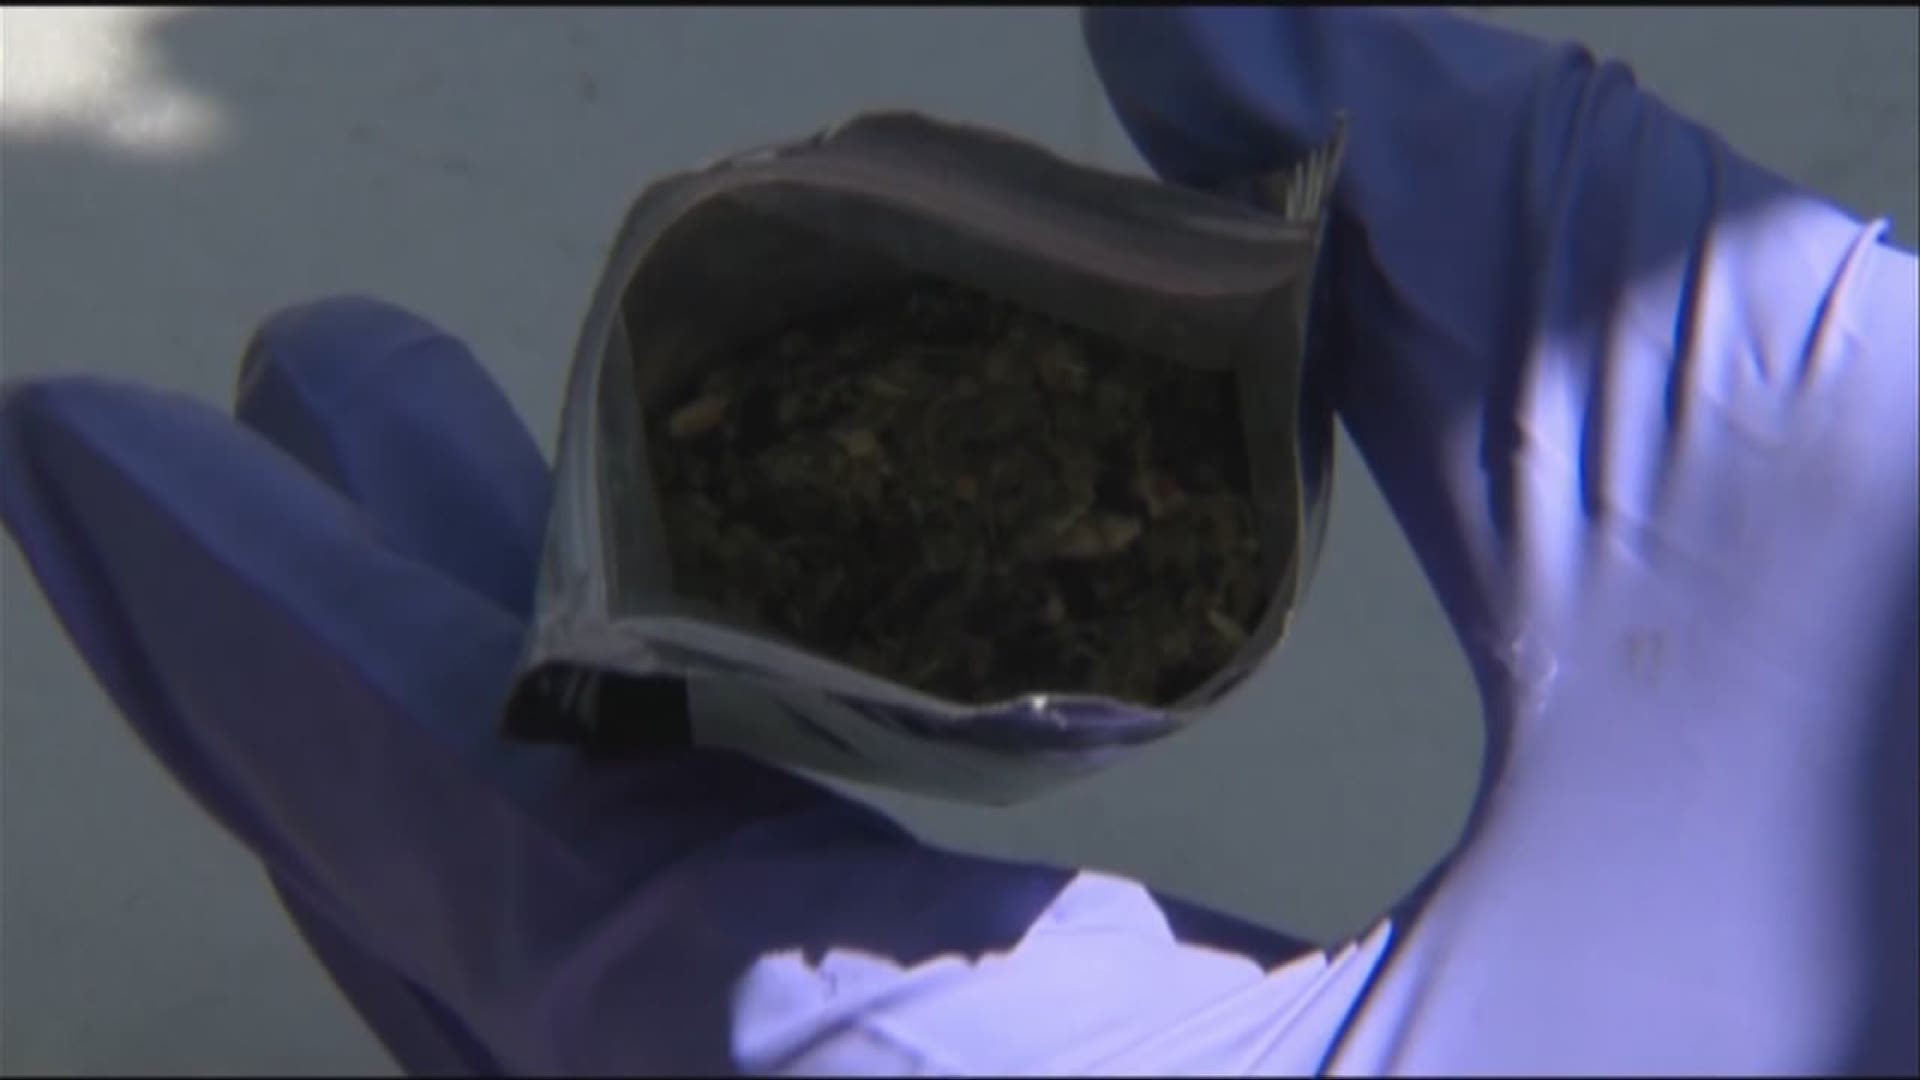 Austin's Synthetic Cannabinoid or k-2 epidemic has shut down city streets and put a strain on emergency responders.